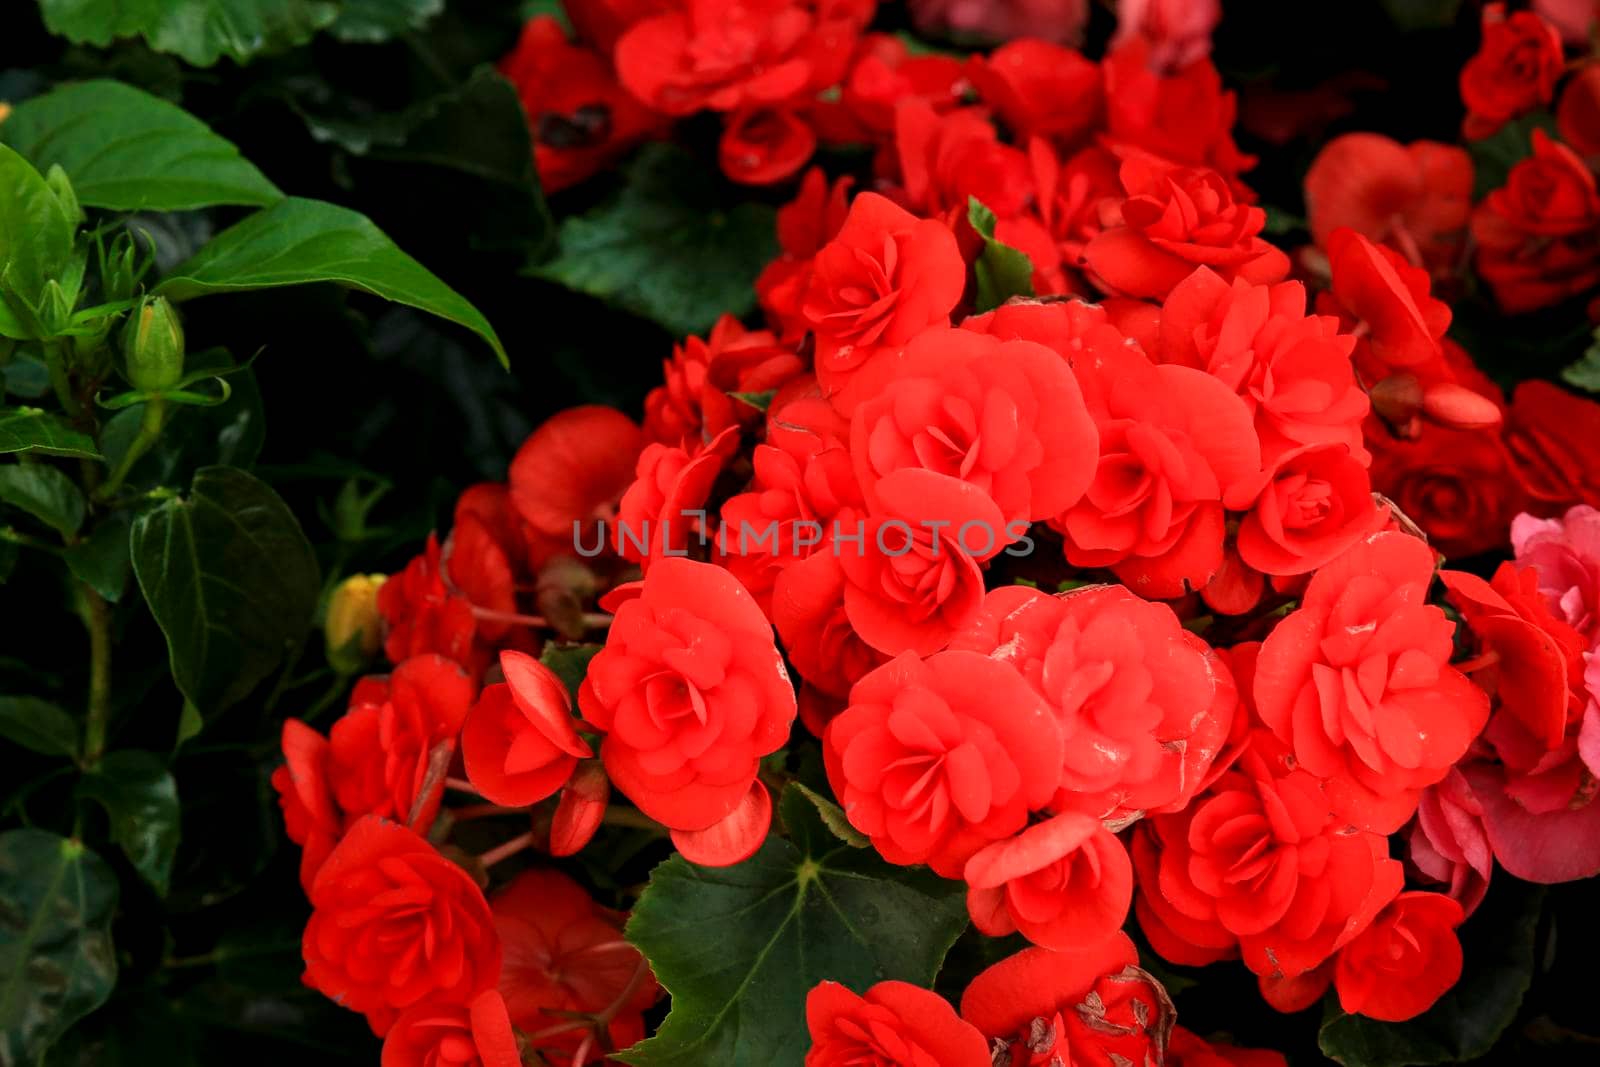 Red Begonia Evansiana Andrews plants in the garden by soniabonet